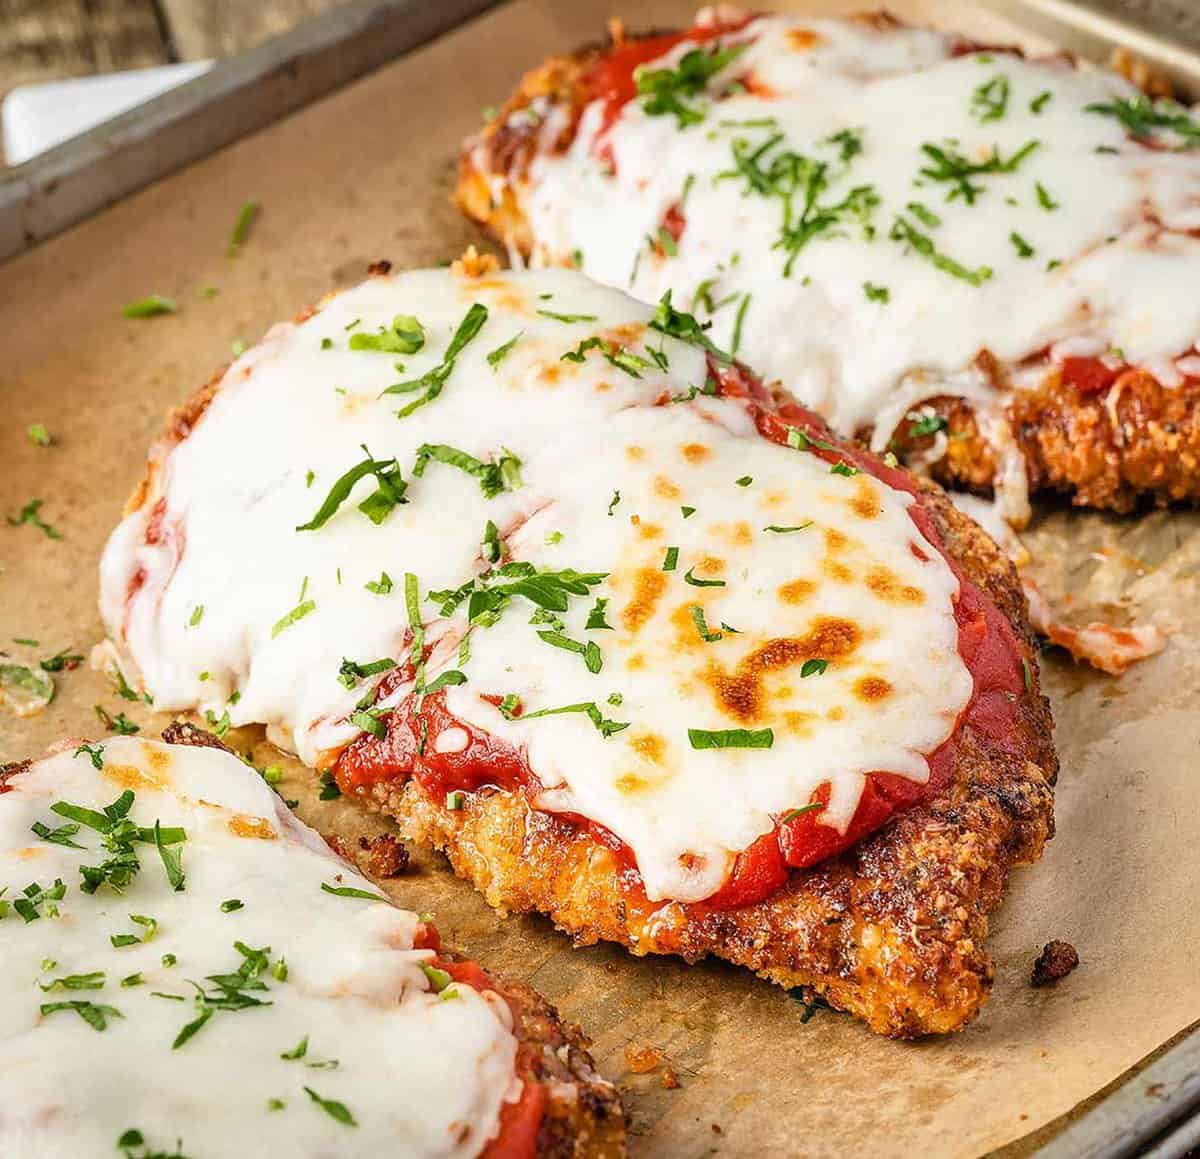 Crispy Chicken Parmesan on a tray with marinara sauce, melted mozzarella, and garnished fresh parsley.